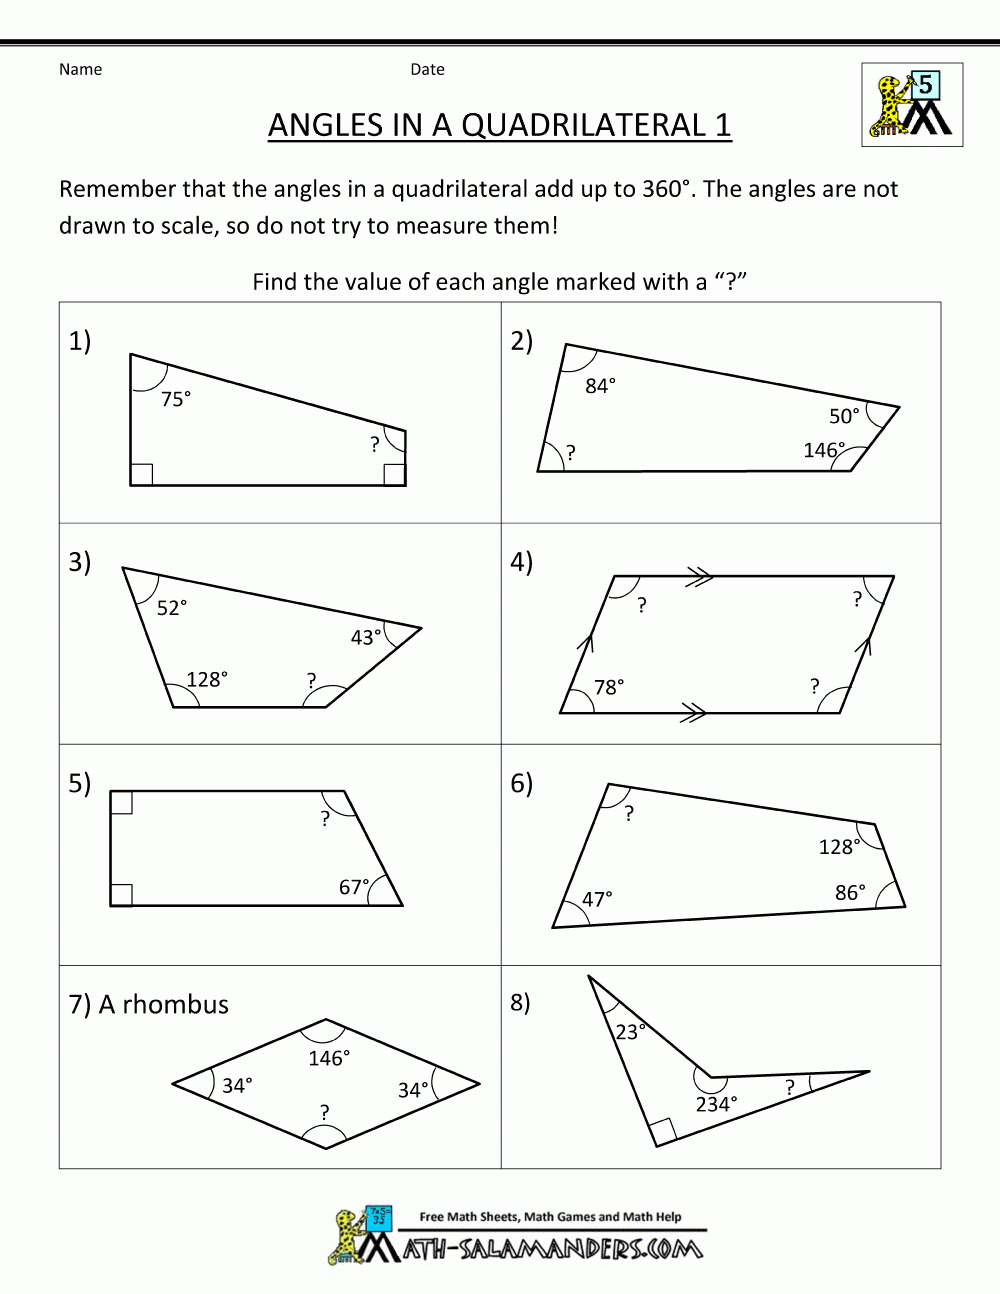 Geometry Worksheets Printable Angles In A Quadrilateral 1 | Geometry - Free Printable Geometry Worksheets For Middle School